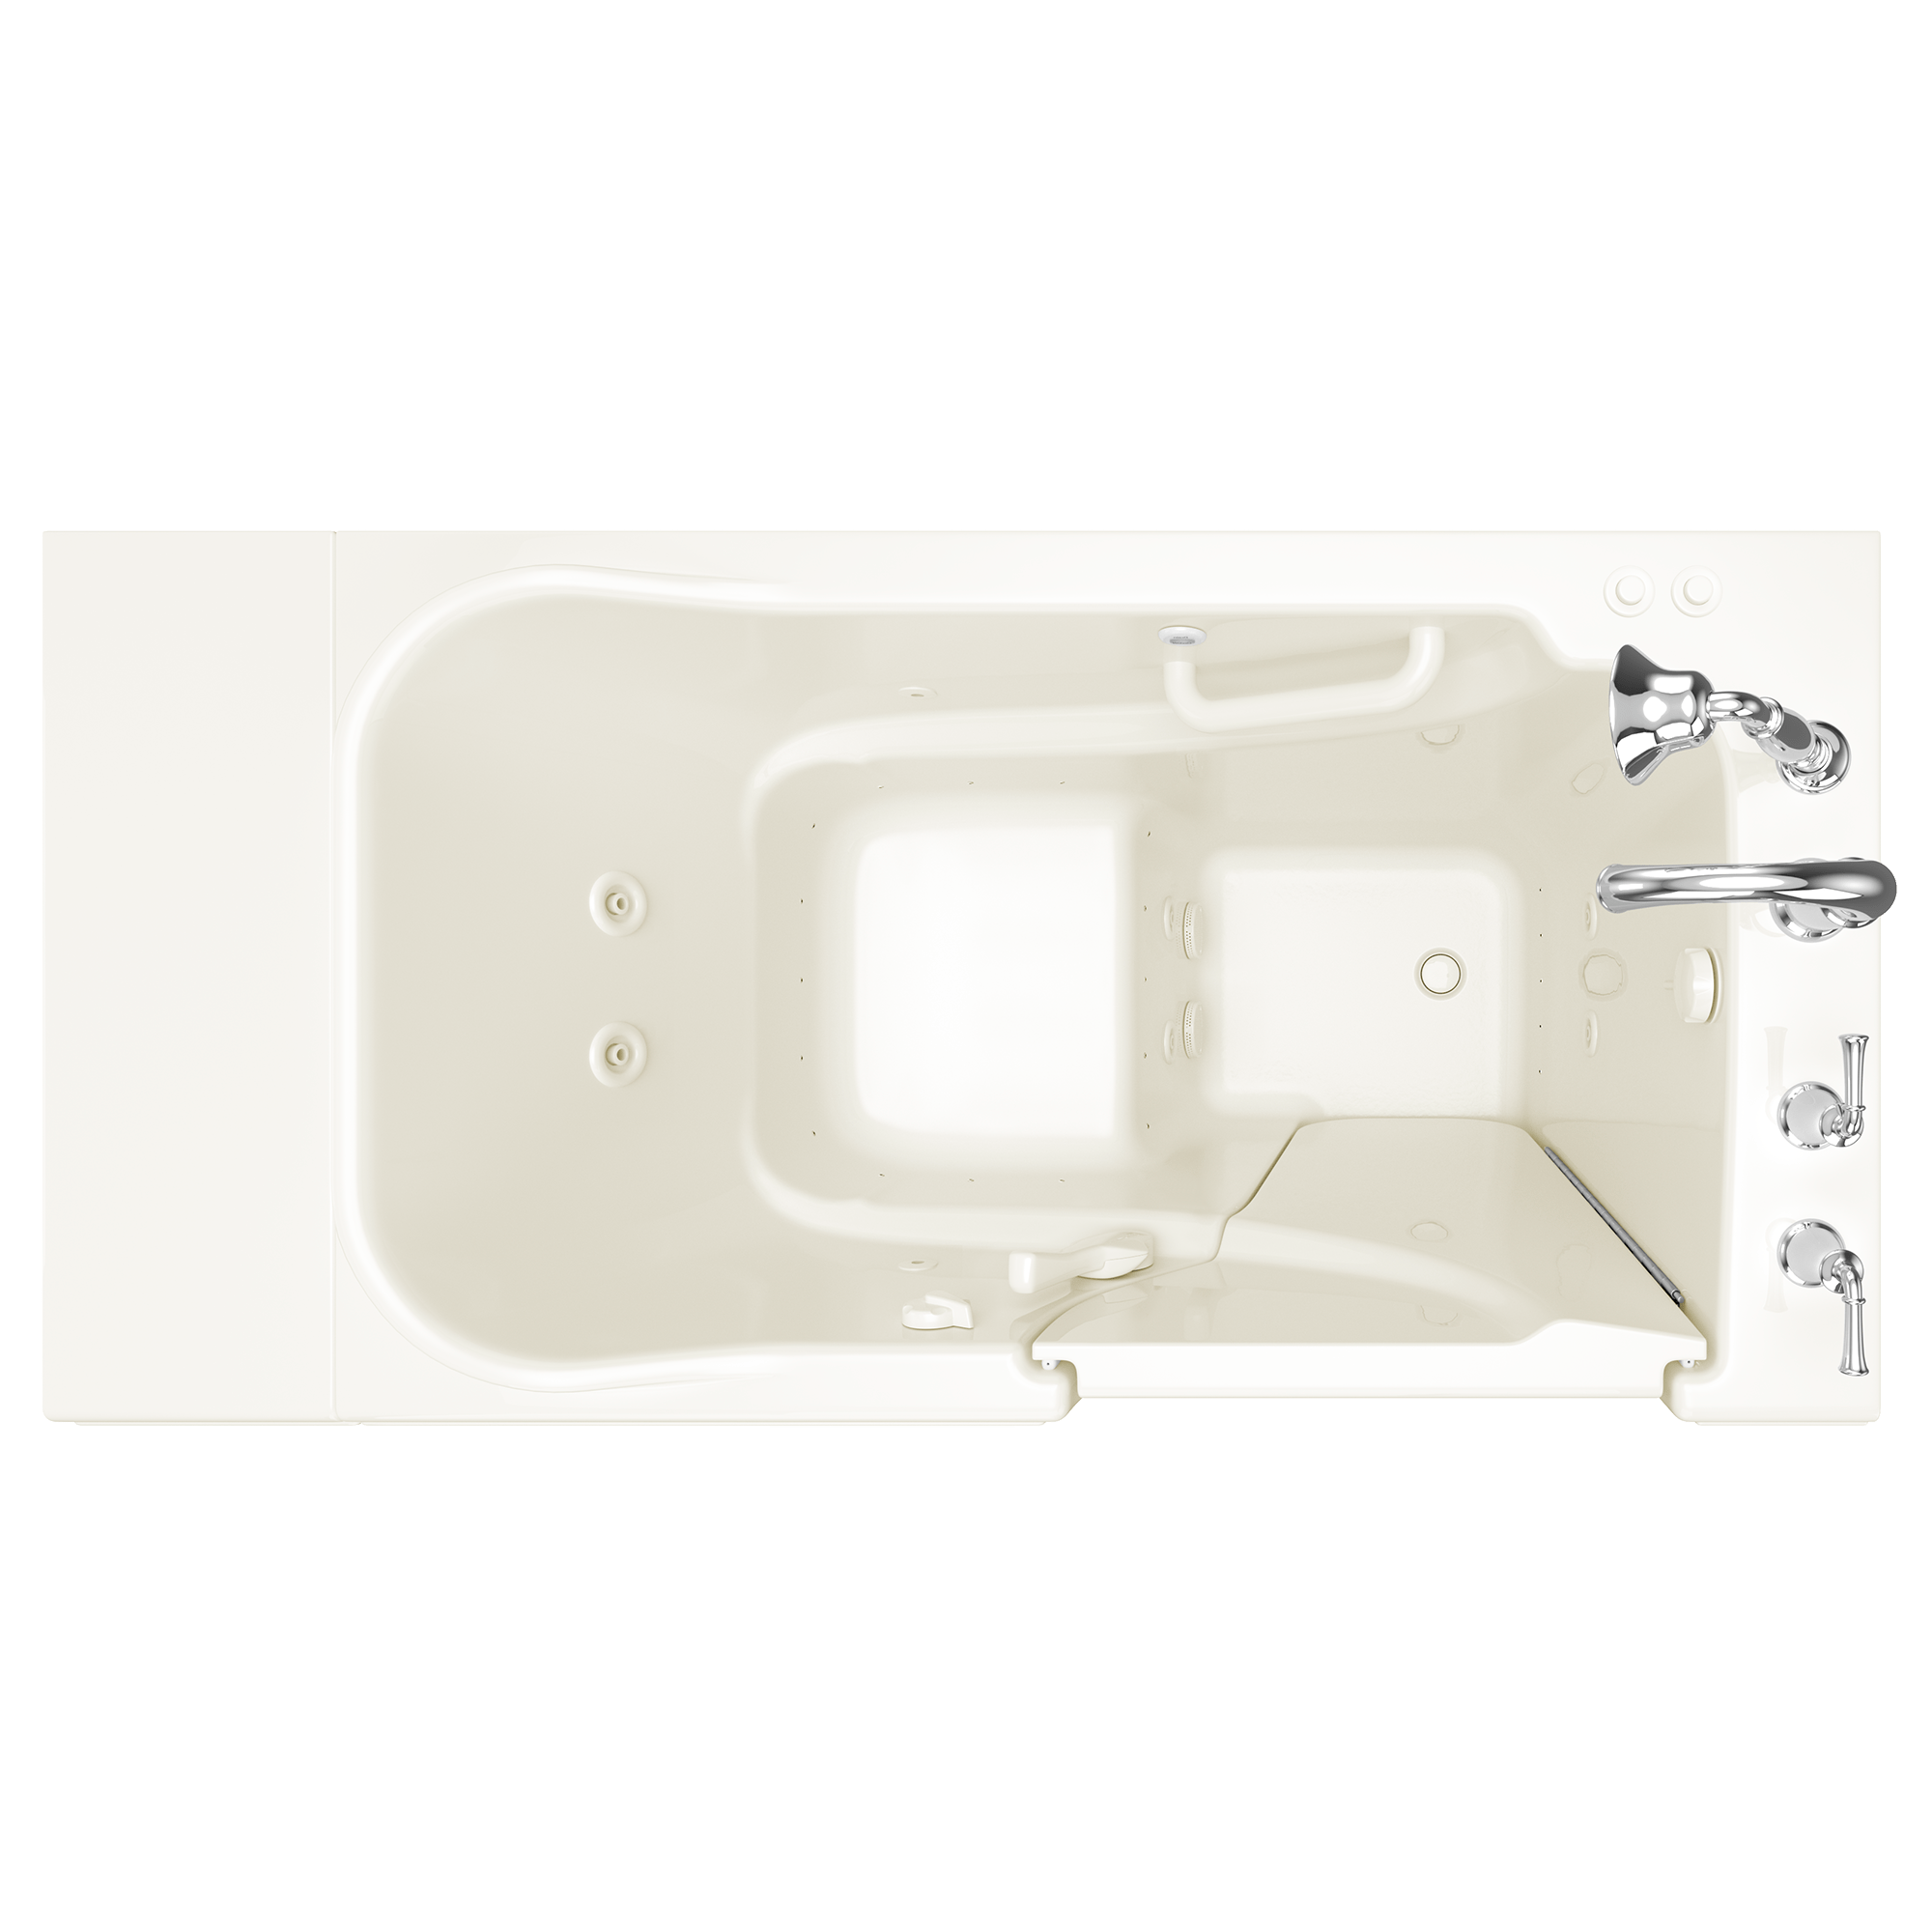 GEL Walk In Tub 52X30 Right Hand DUAL Biscuit ST BISCUIT